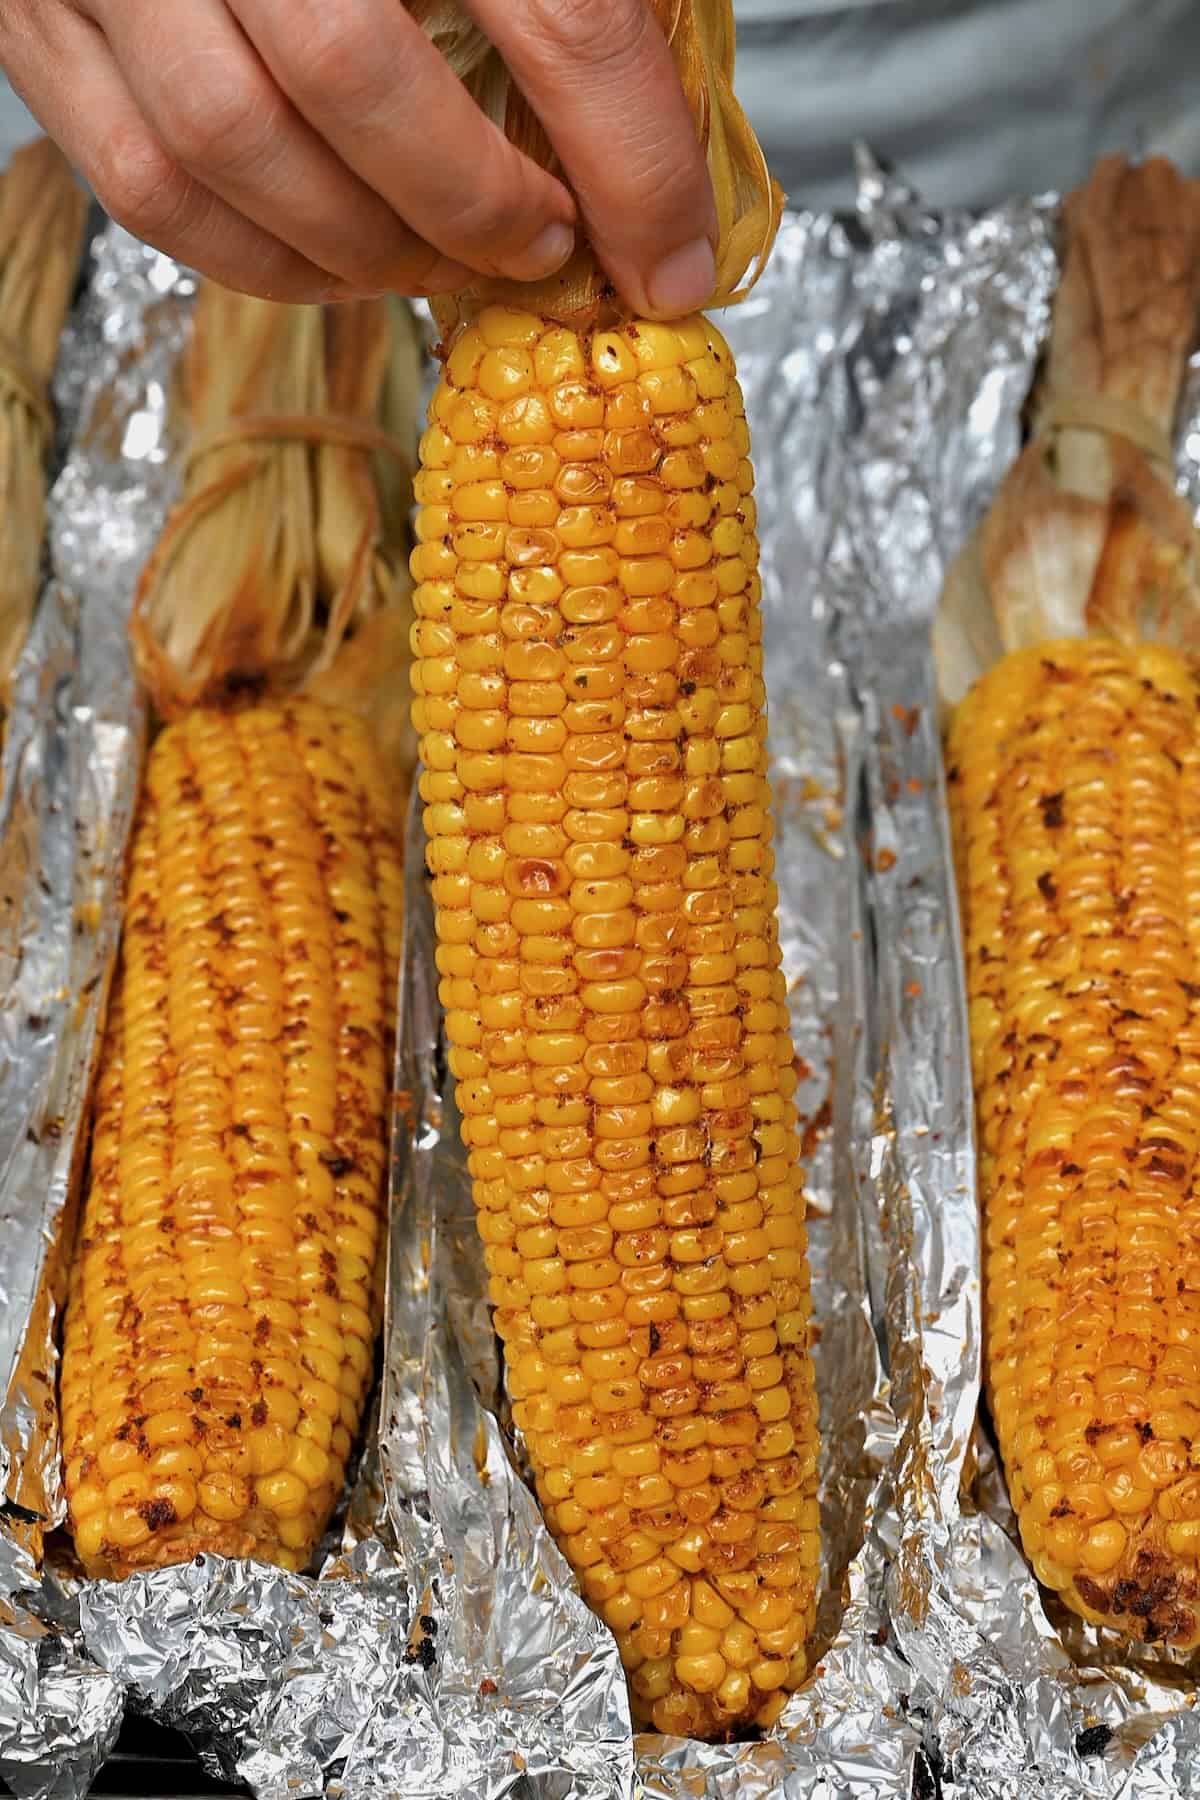 Oven roasted corn on the cob